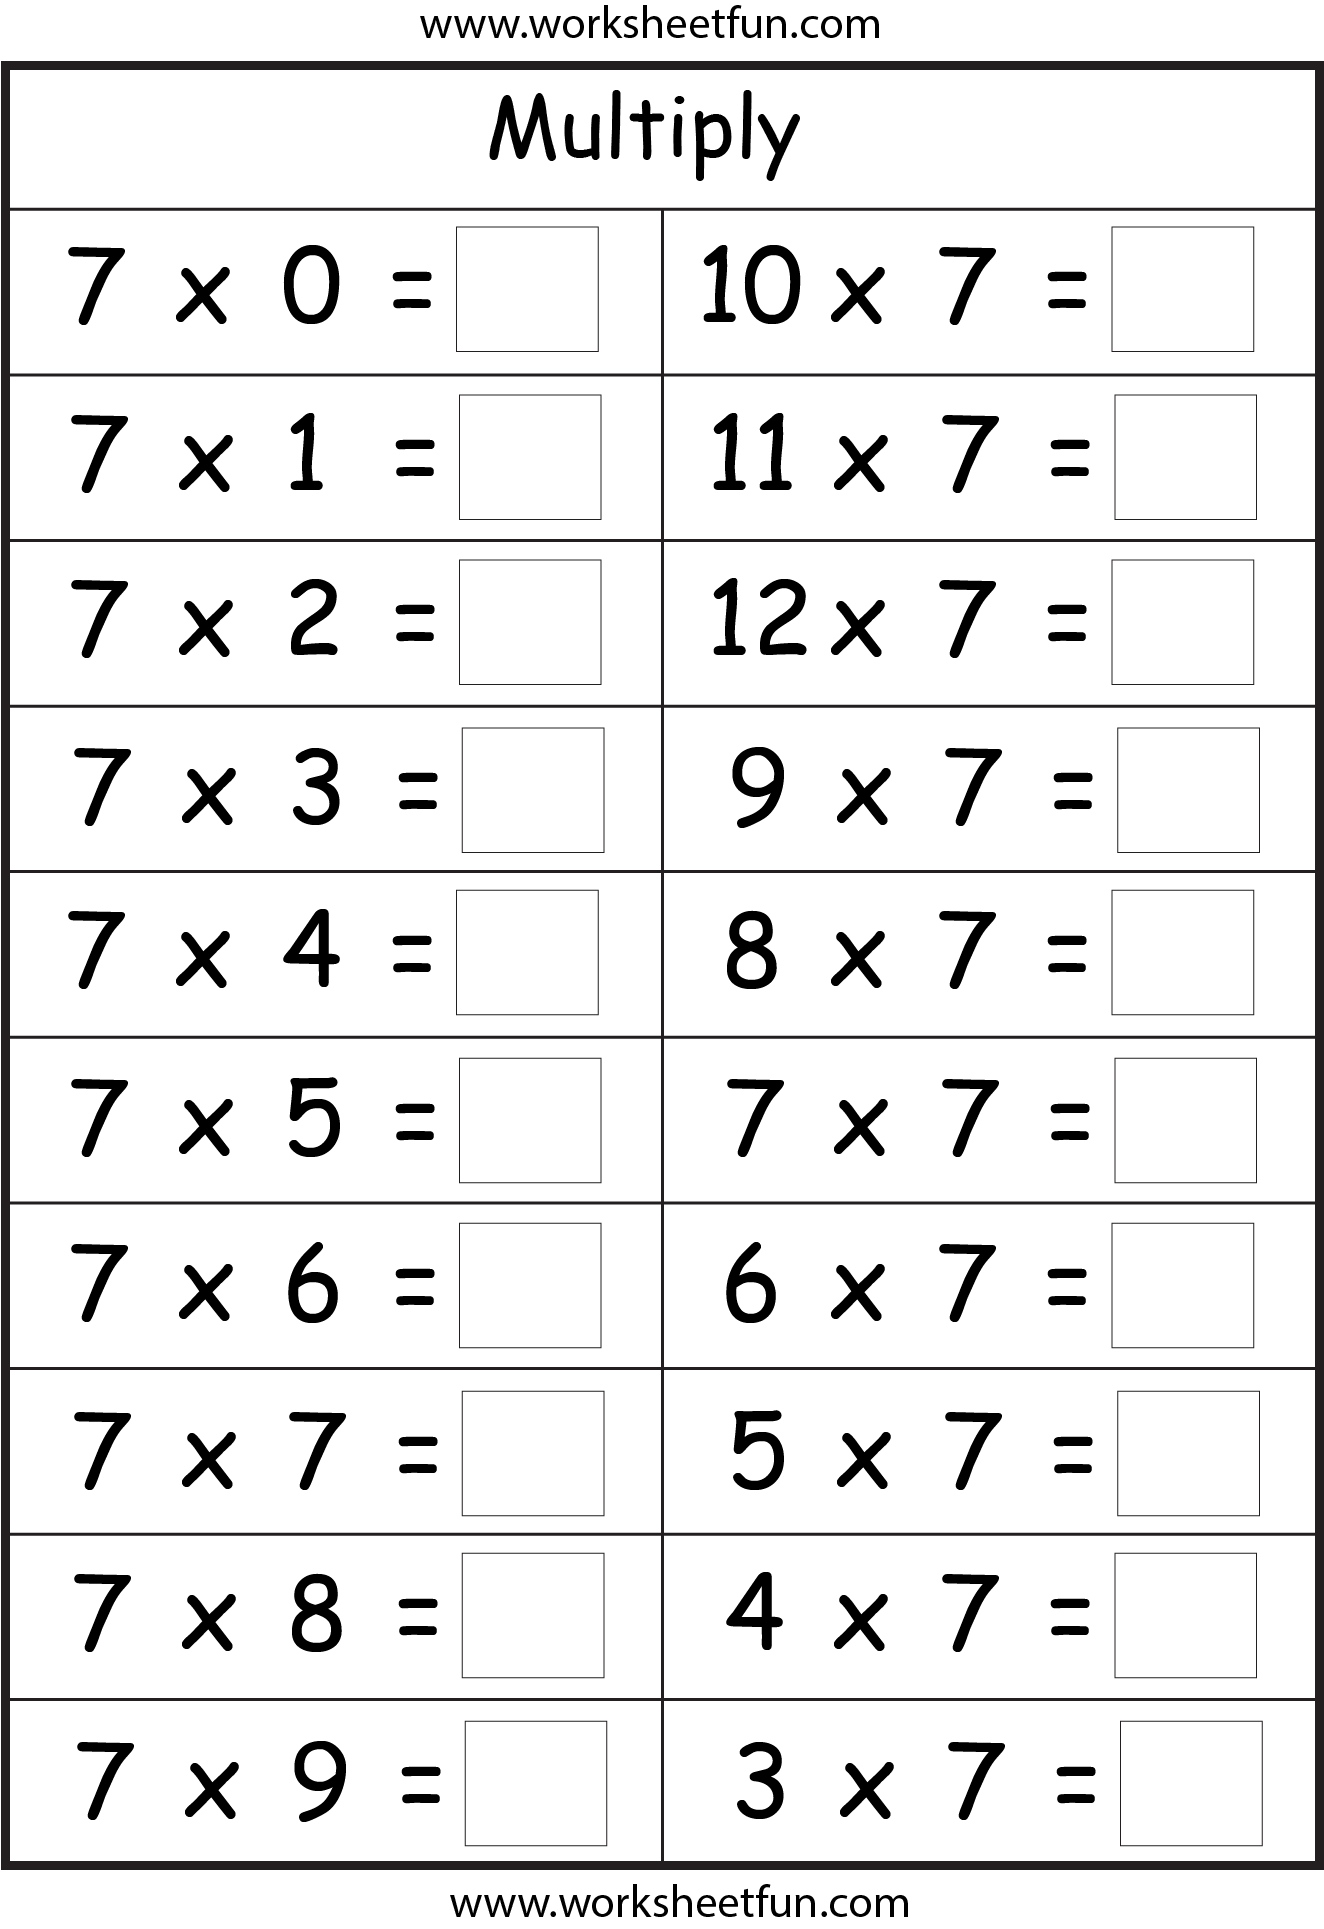  Multiplication Basic Facts 2 3 4 5 6 7 8 9 Times Tables Eight Worksheets FREE 